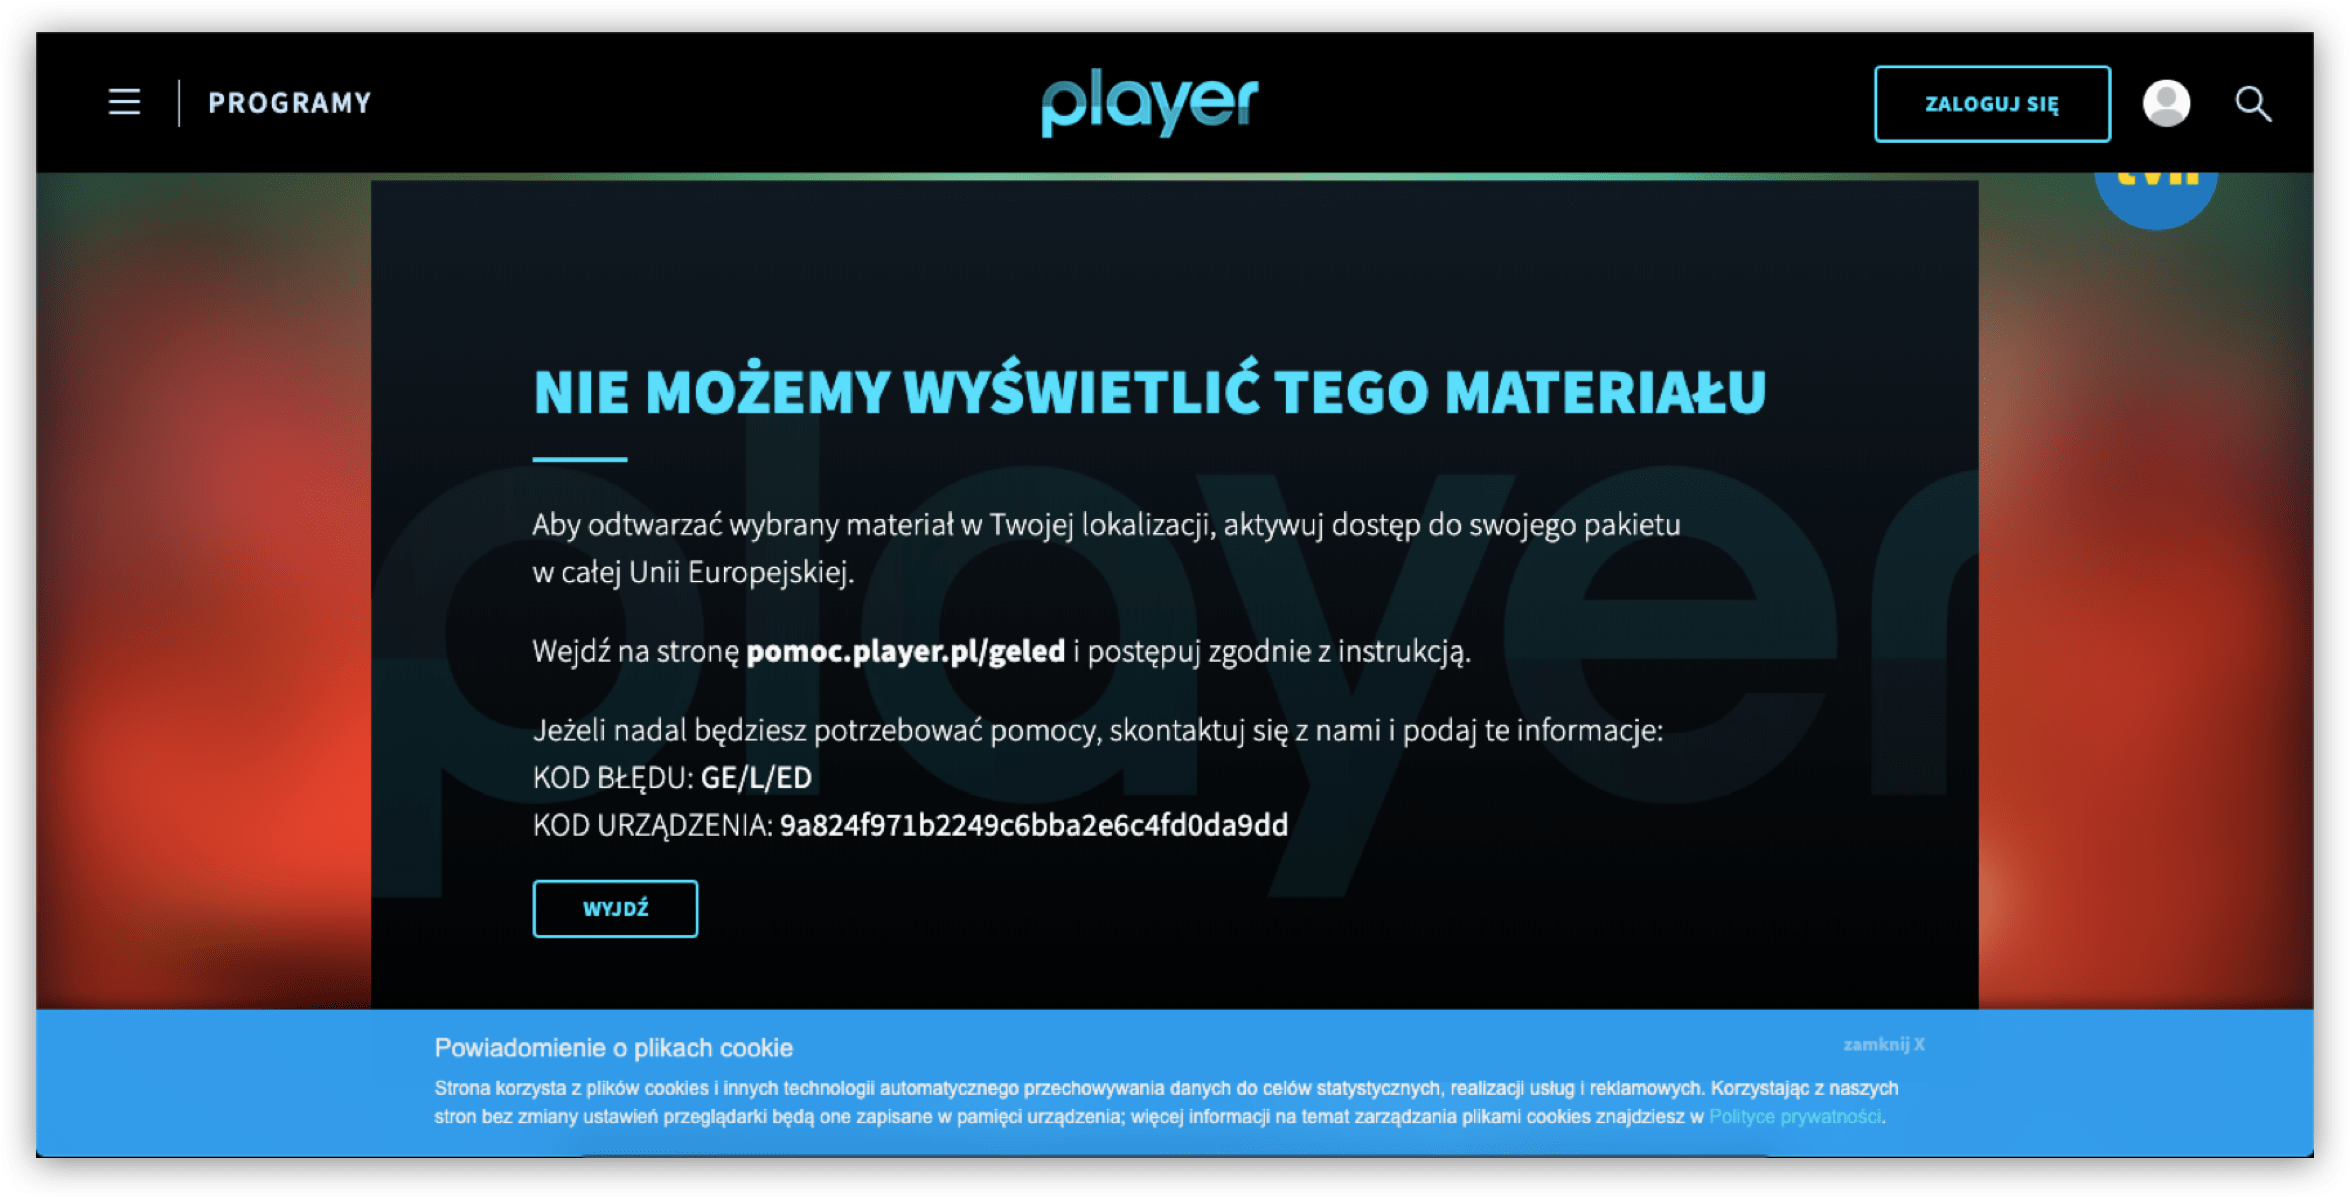 How To Access Tvn Player From All Countries